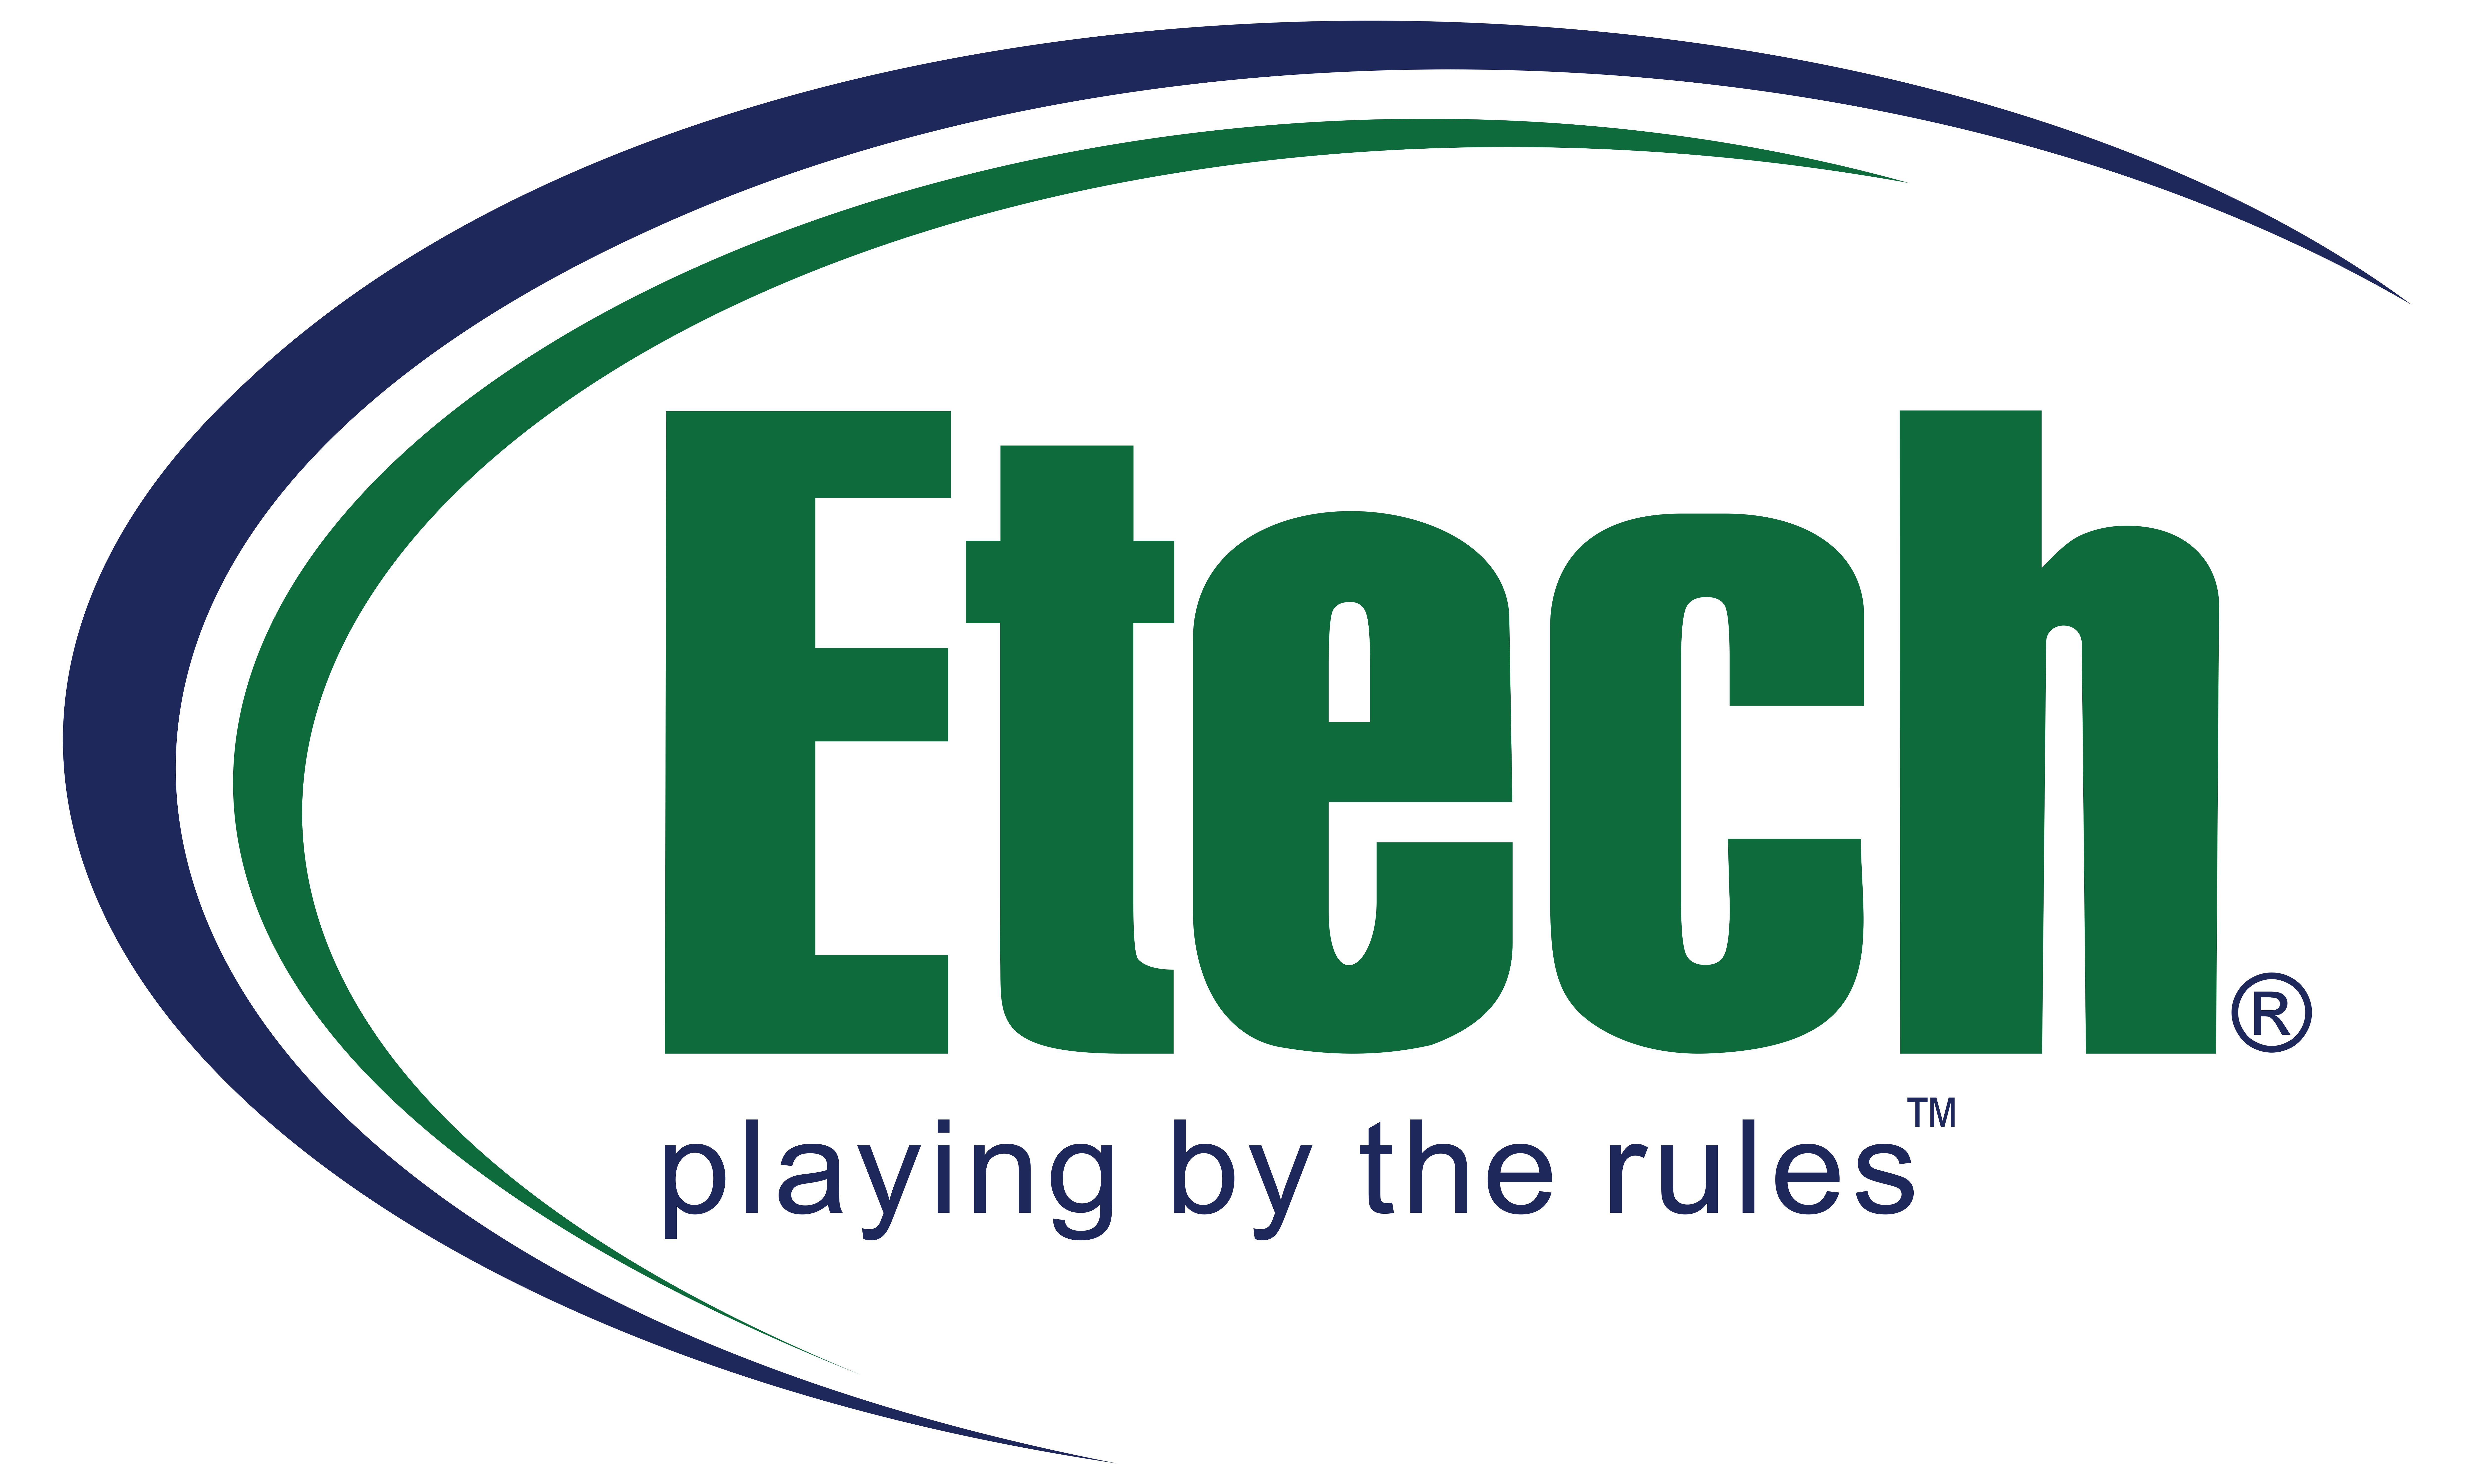 Etech Global Services